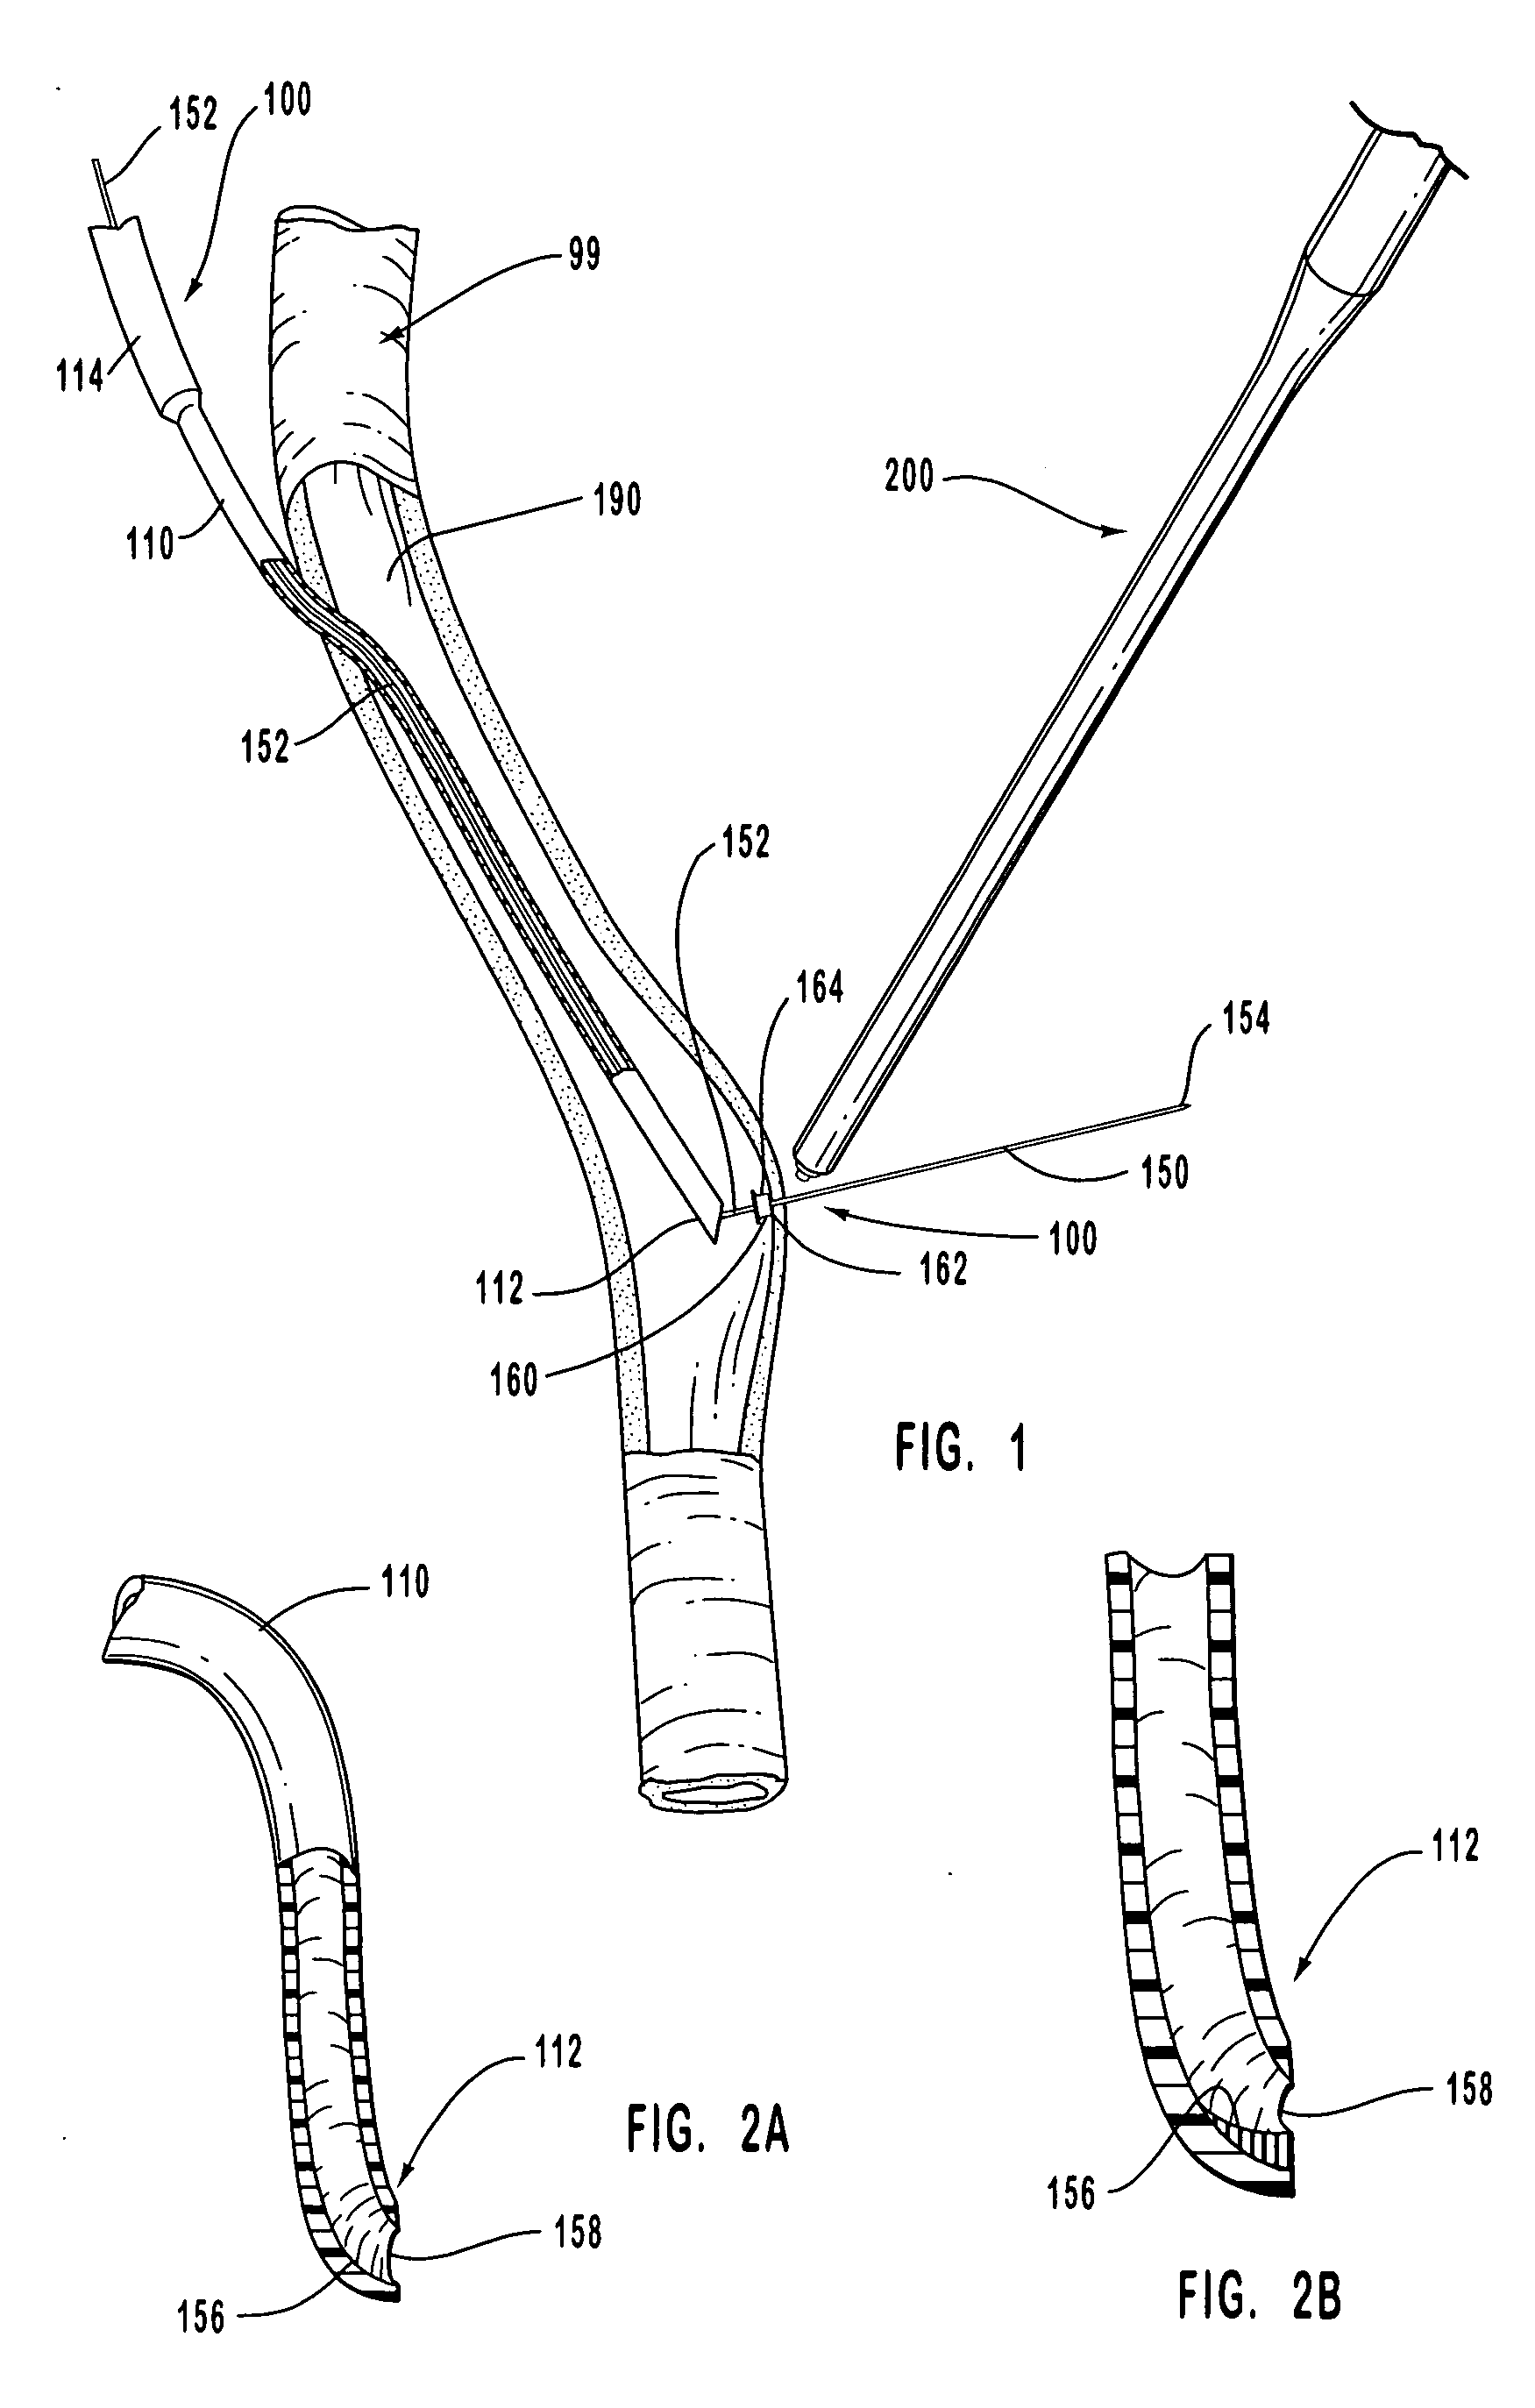 Staple and anvil anastomosis system